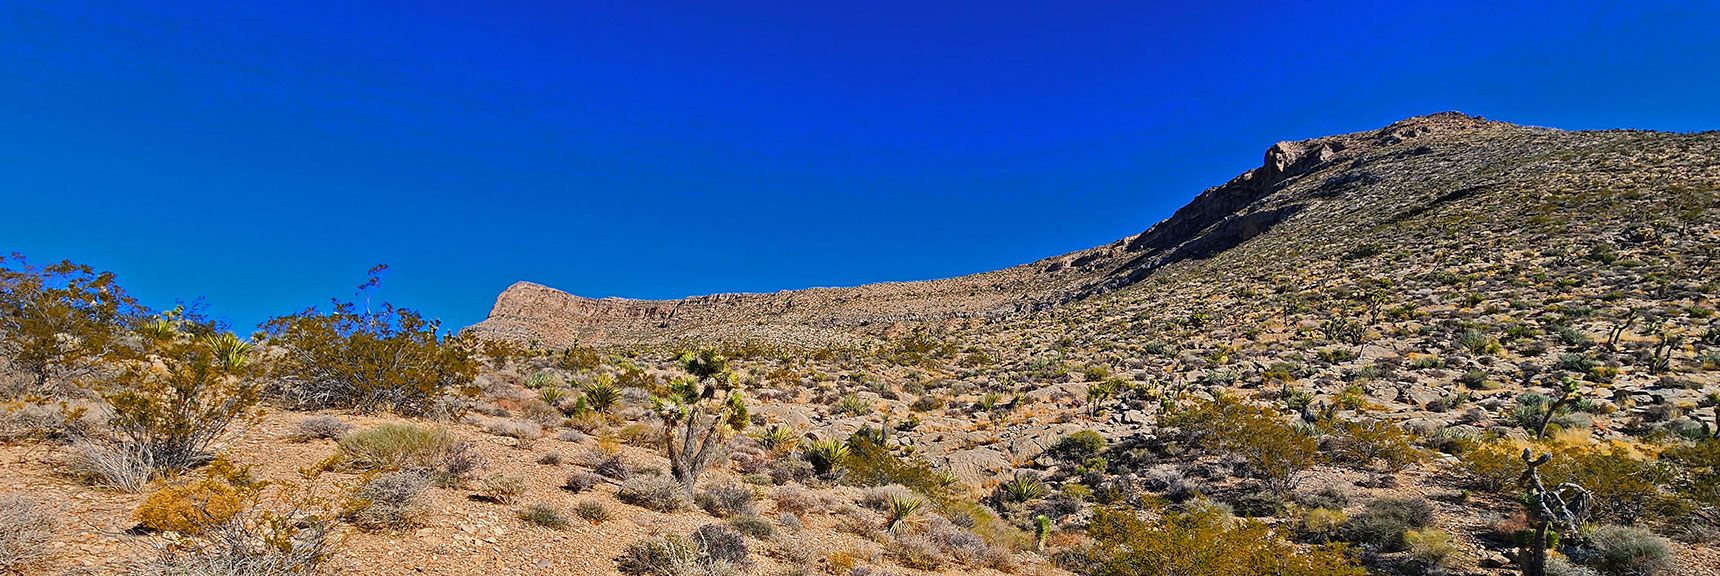 Looking Back at the Shallow, Best Summit Approach Canyon. | Landmark Bluff Circuit | Lovell Canyon, Nevada